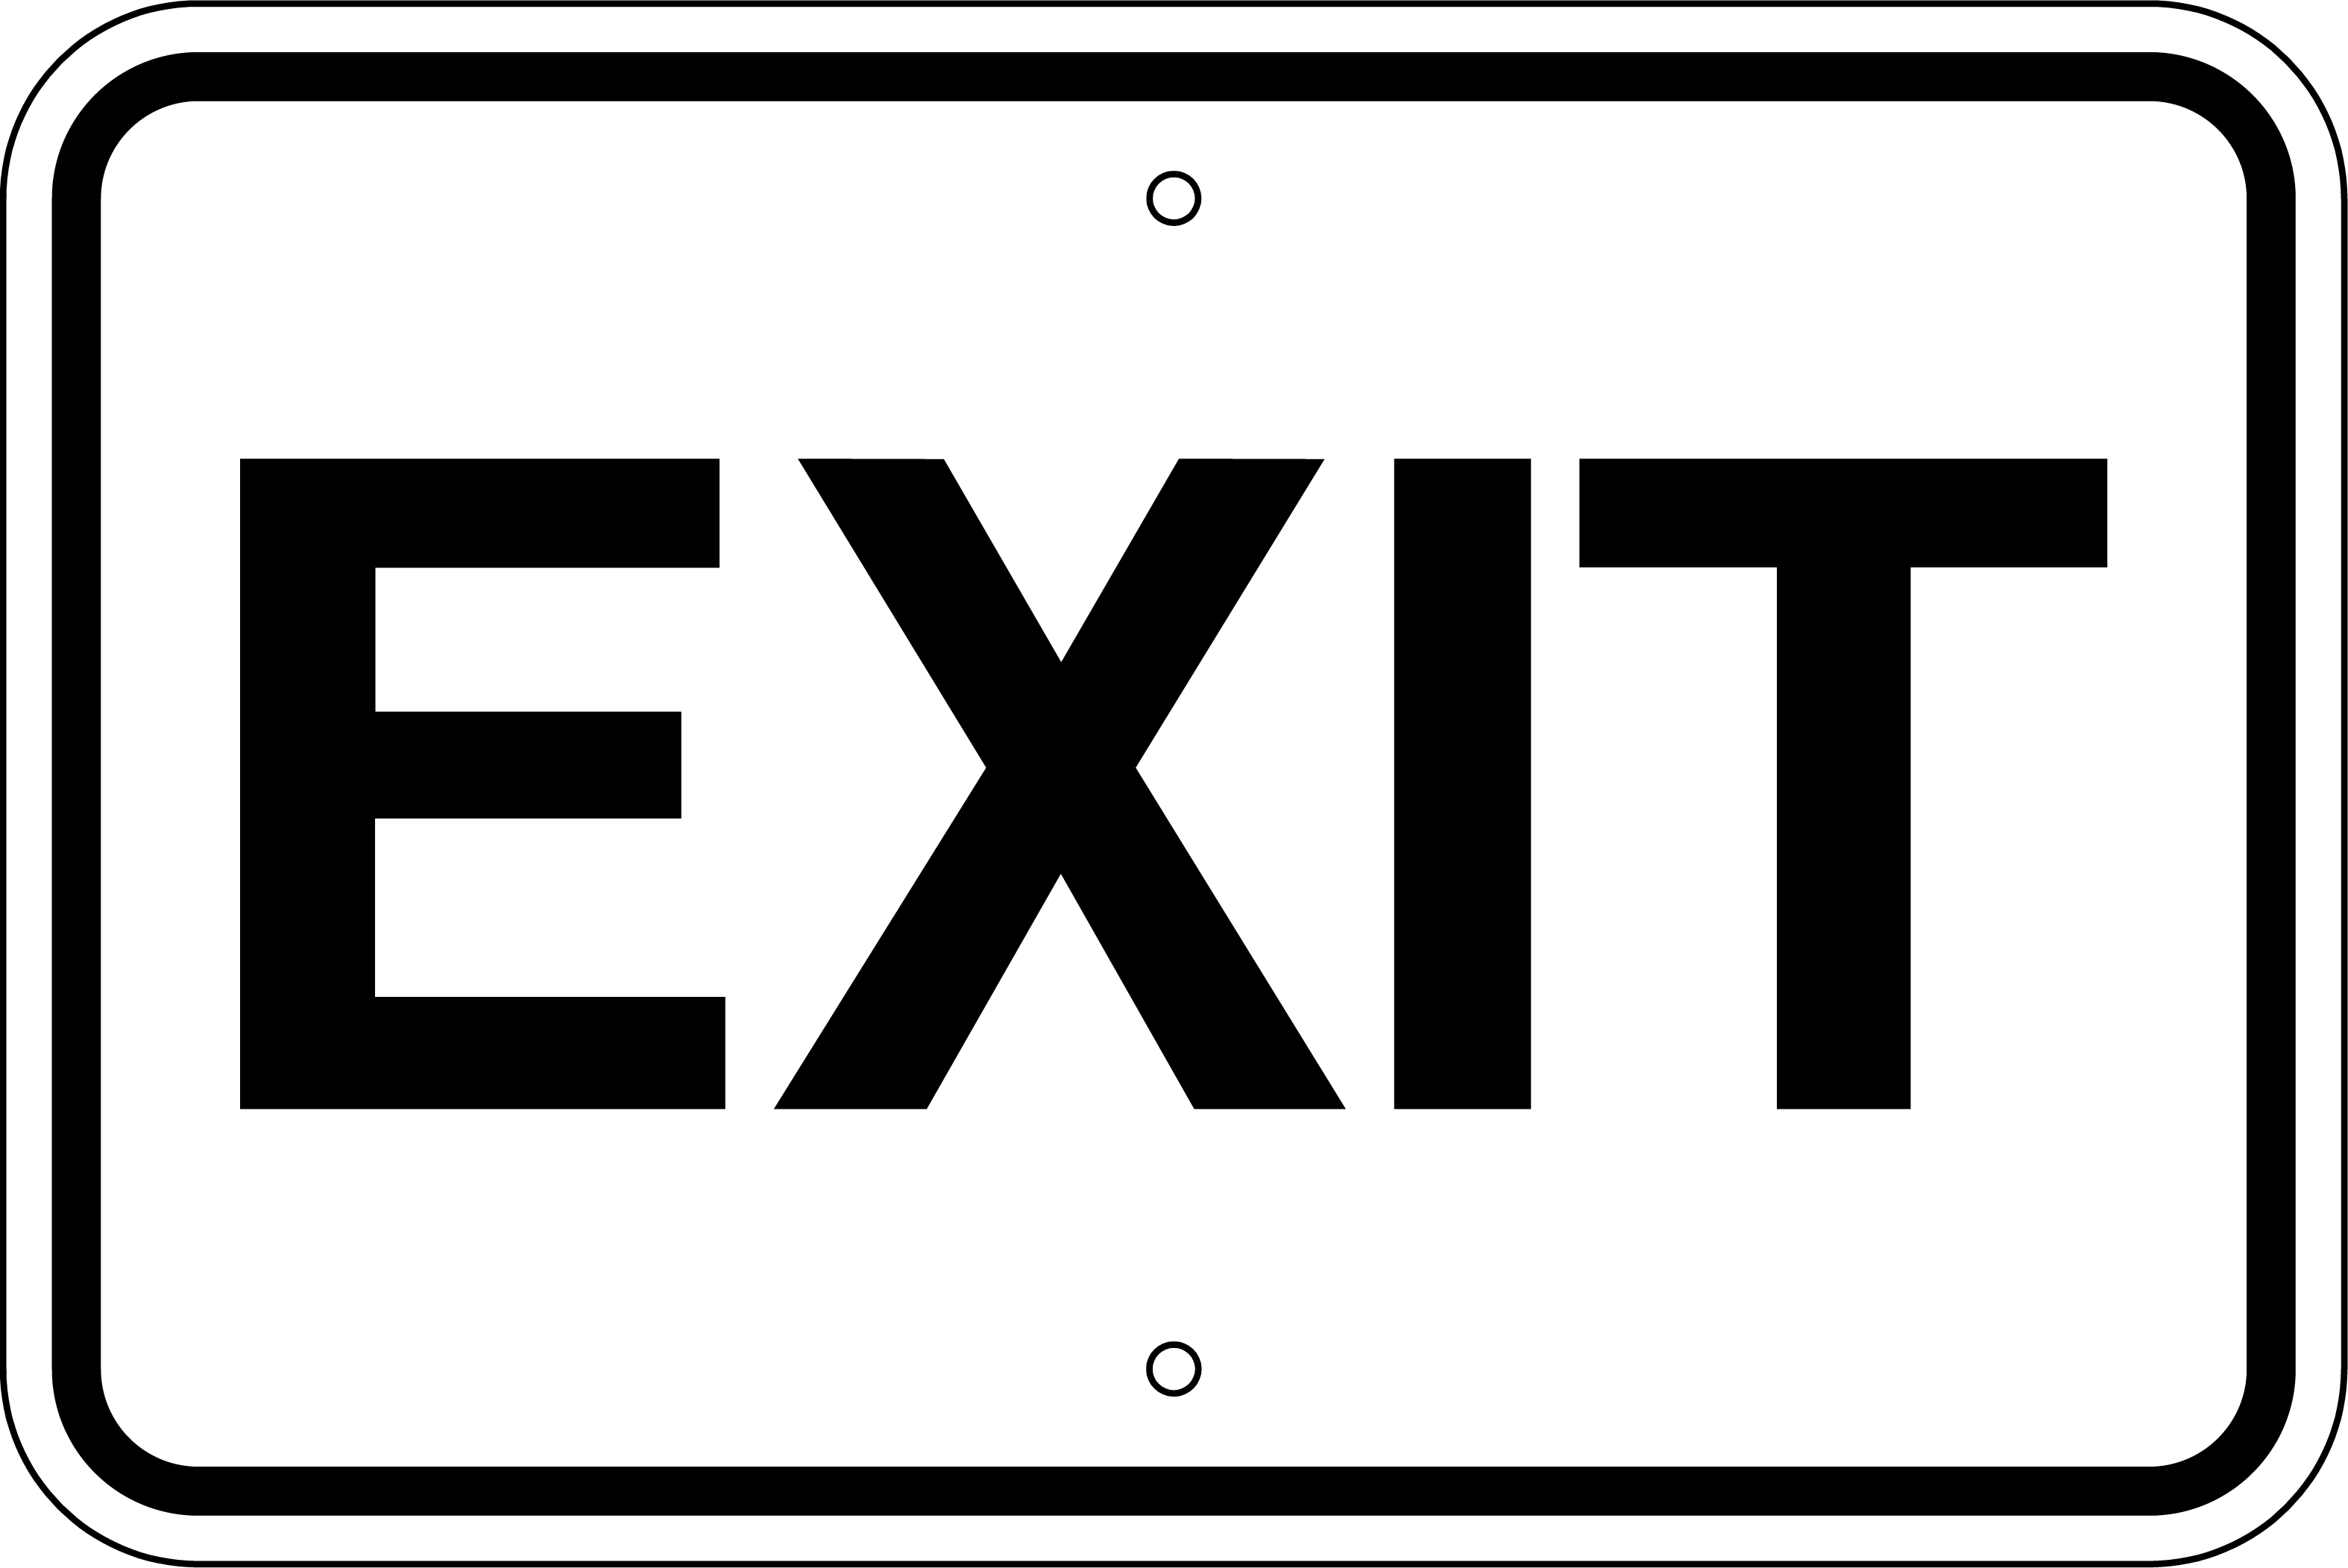 Printable Exit Sign Images  Pictures - Becuo